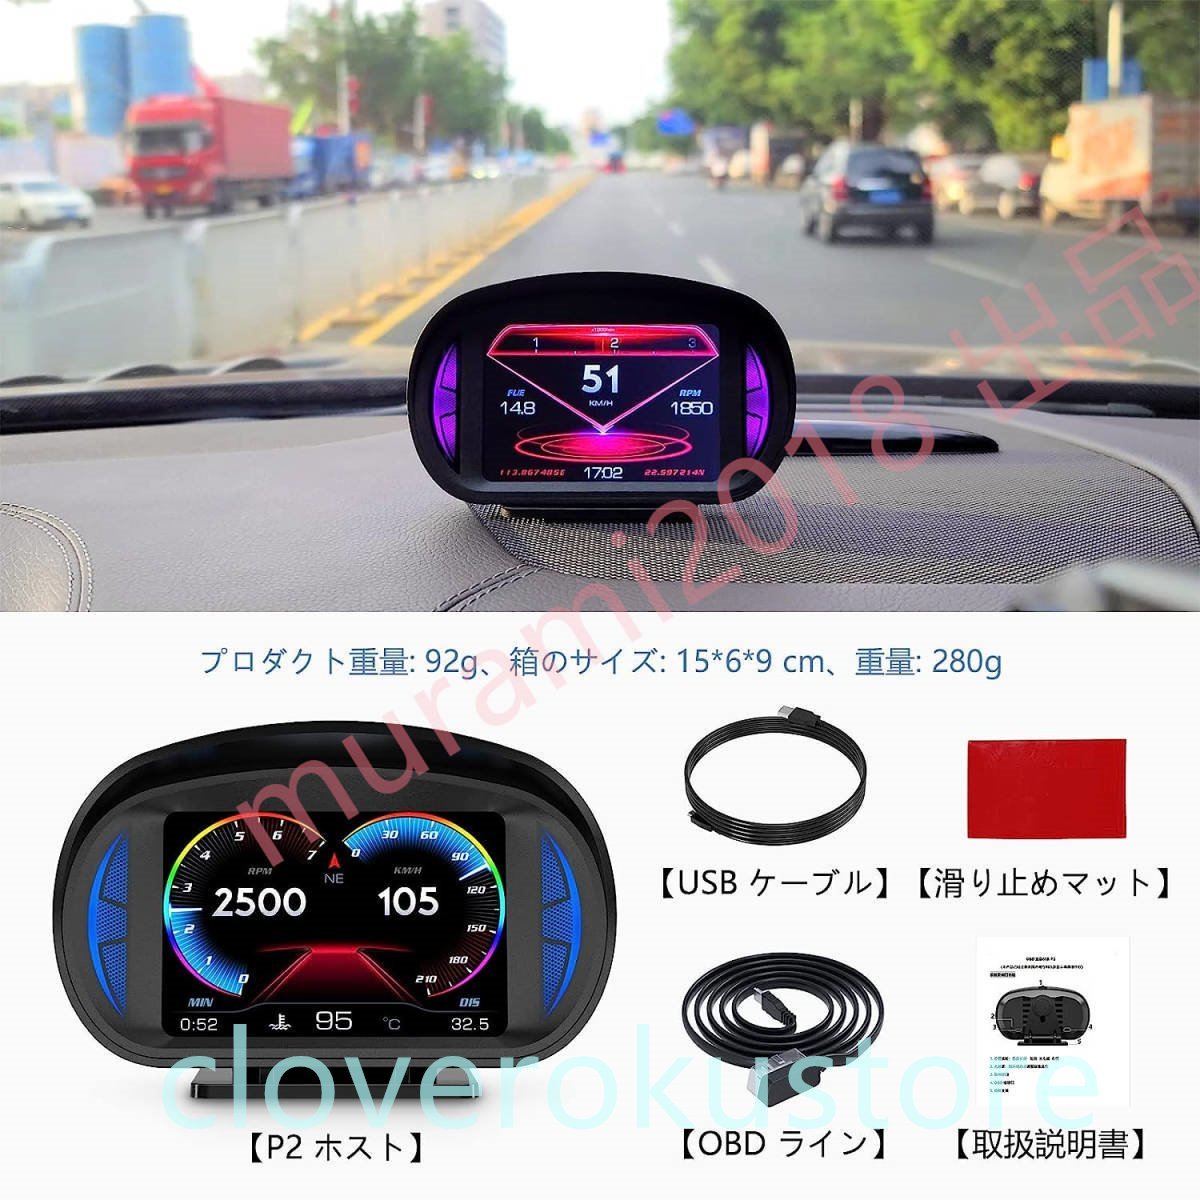  in-vehicle OBD2 meter, speed meter, tachometer,GPS+OBD+ inclination total mode multi meter, obstacle diagnosis, warning with function 